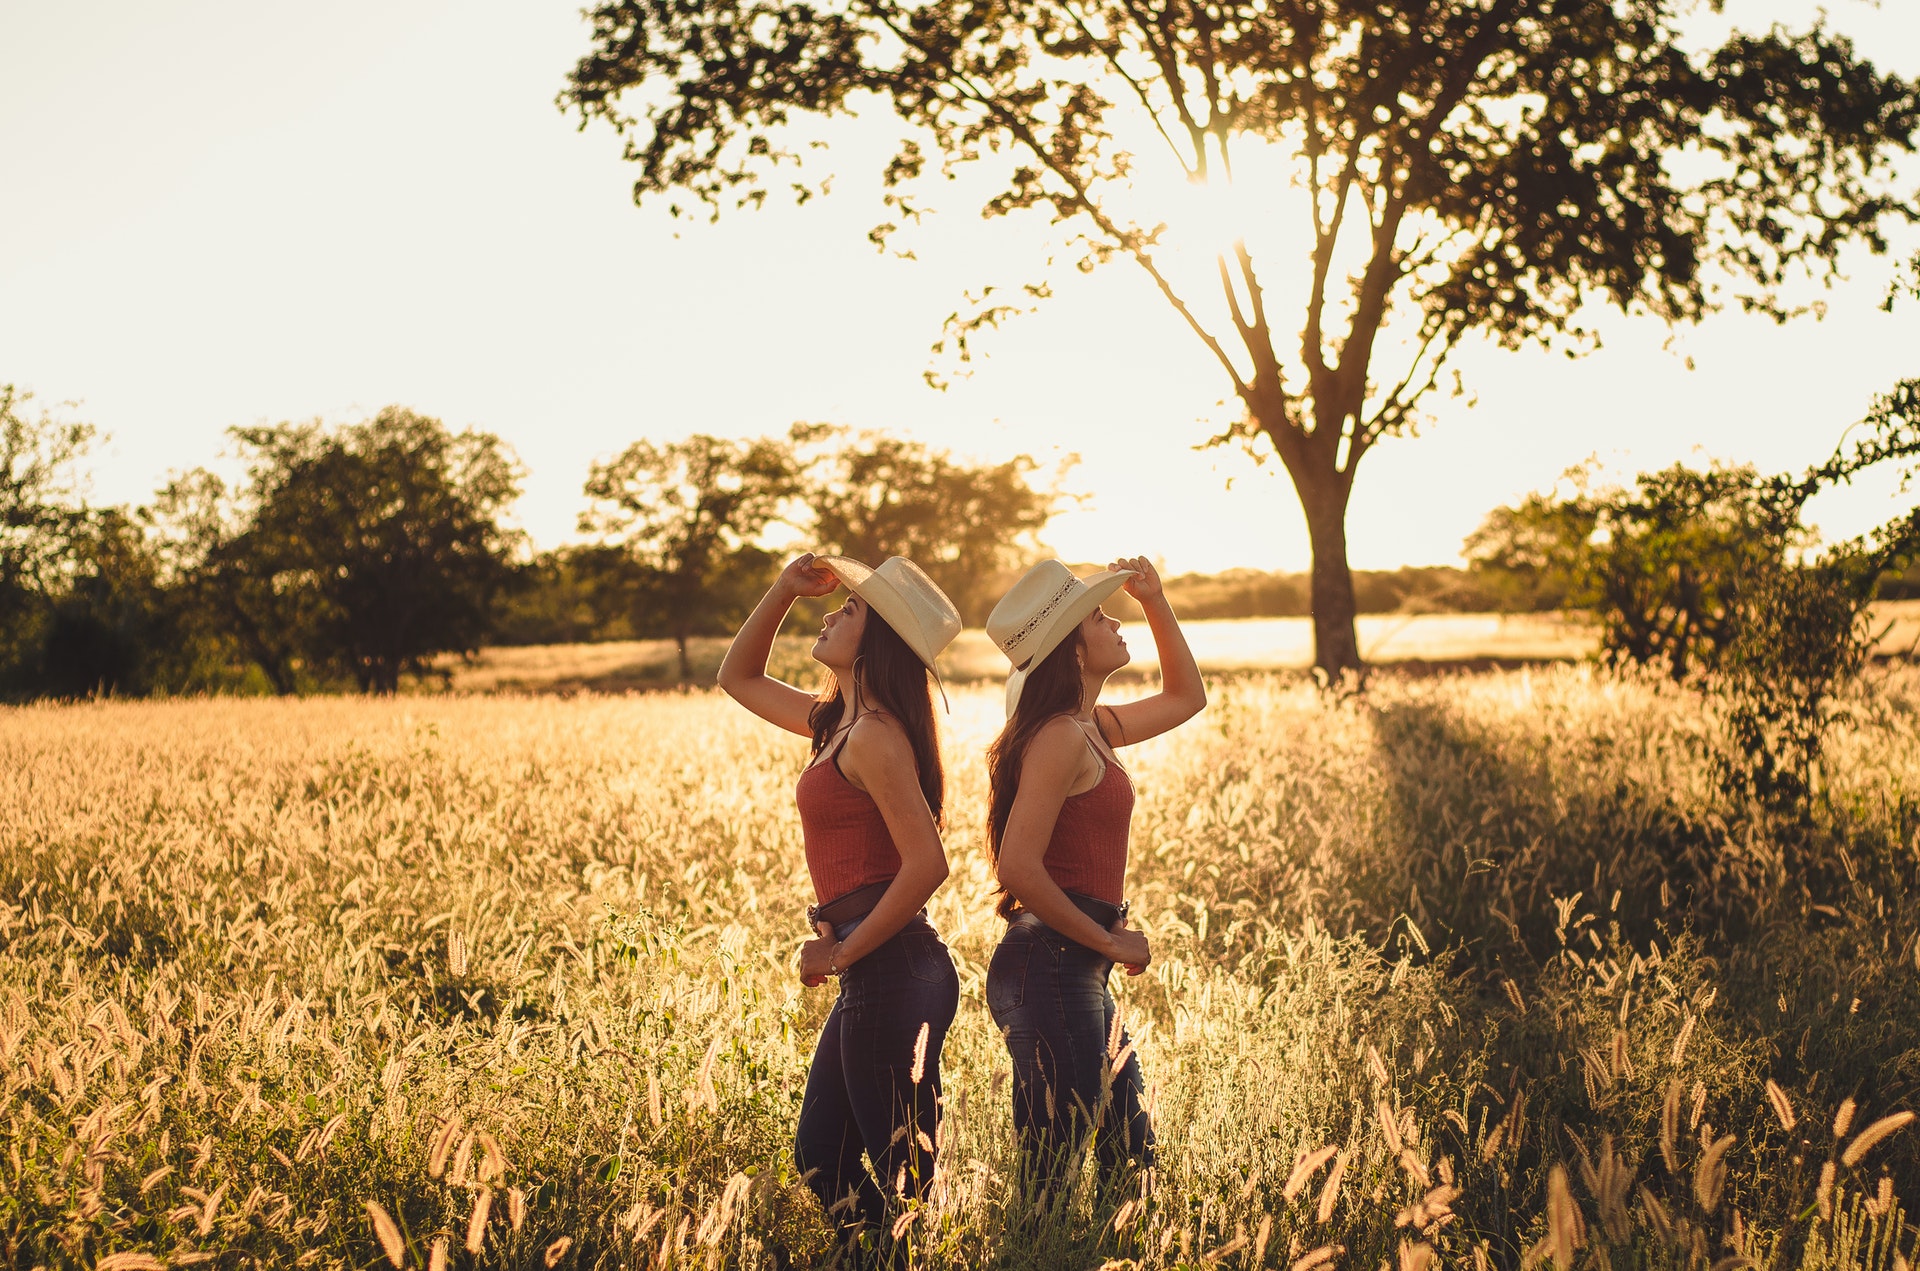 Soul vs ego - twin adult women in a sunny field back to back wearing sun hats and looking in opposite directions